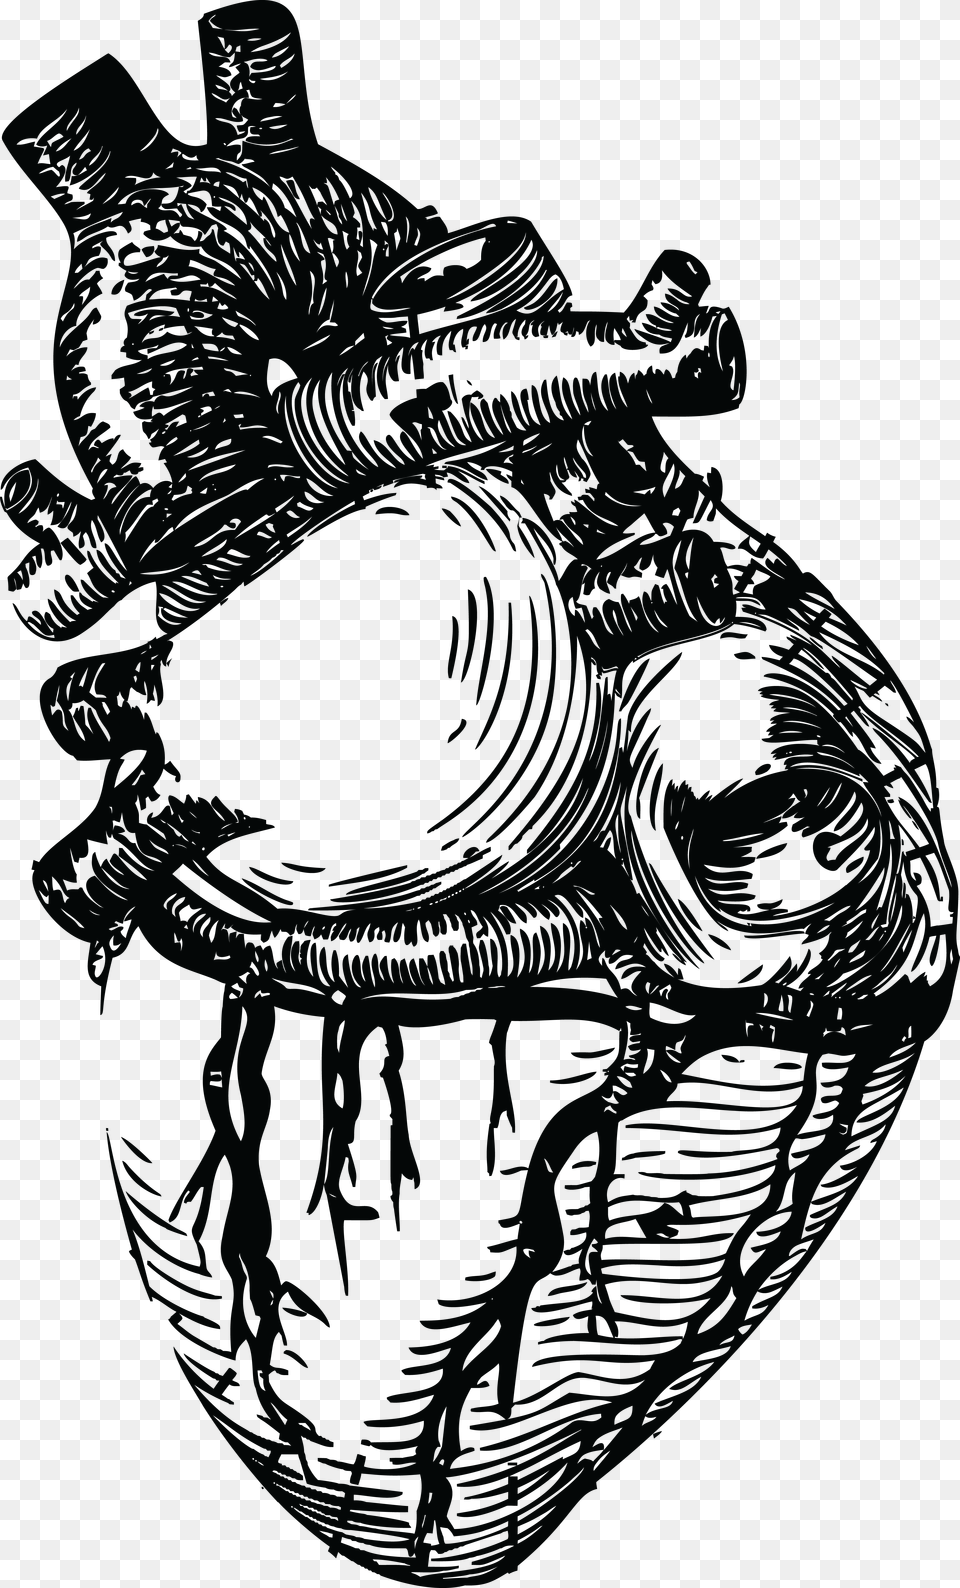 Realistic Heart Line Art Png Image